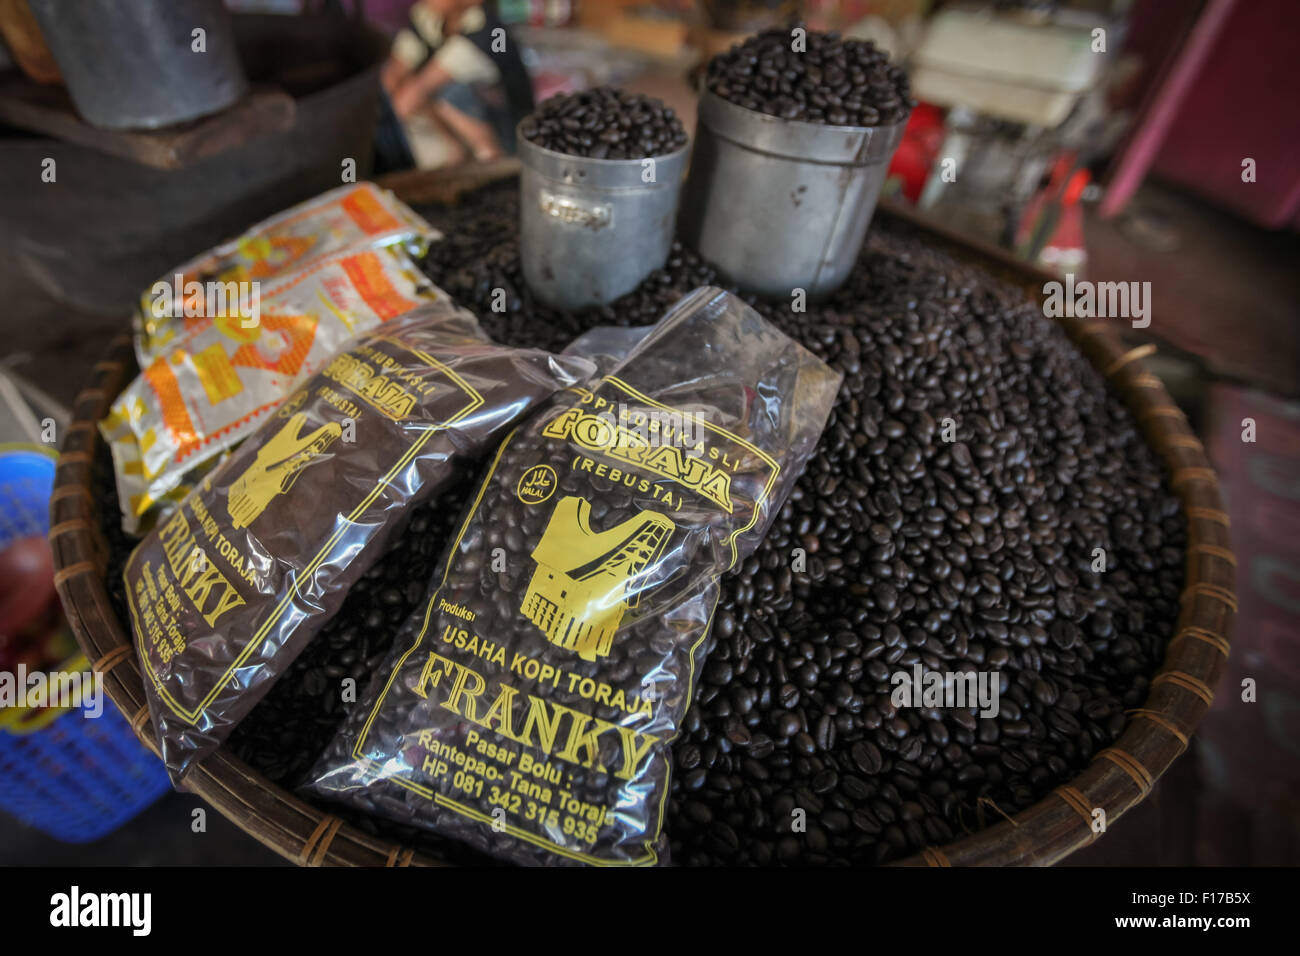 Specimen of Toraja's single-origin arabica coffee that is processed, roasted, labeled, and marketed by a community enterprise in Toraja, Indonesia. Stock Photo